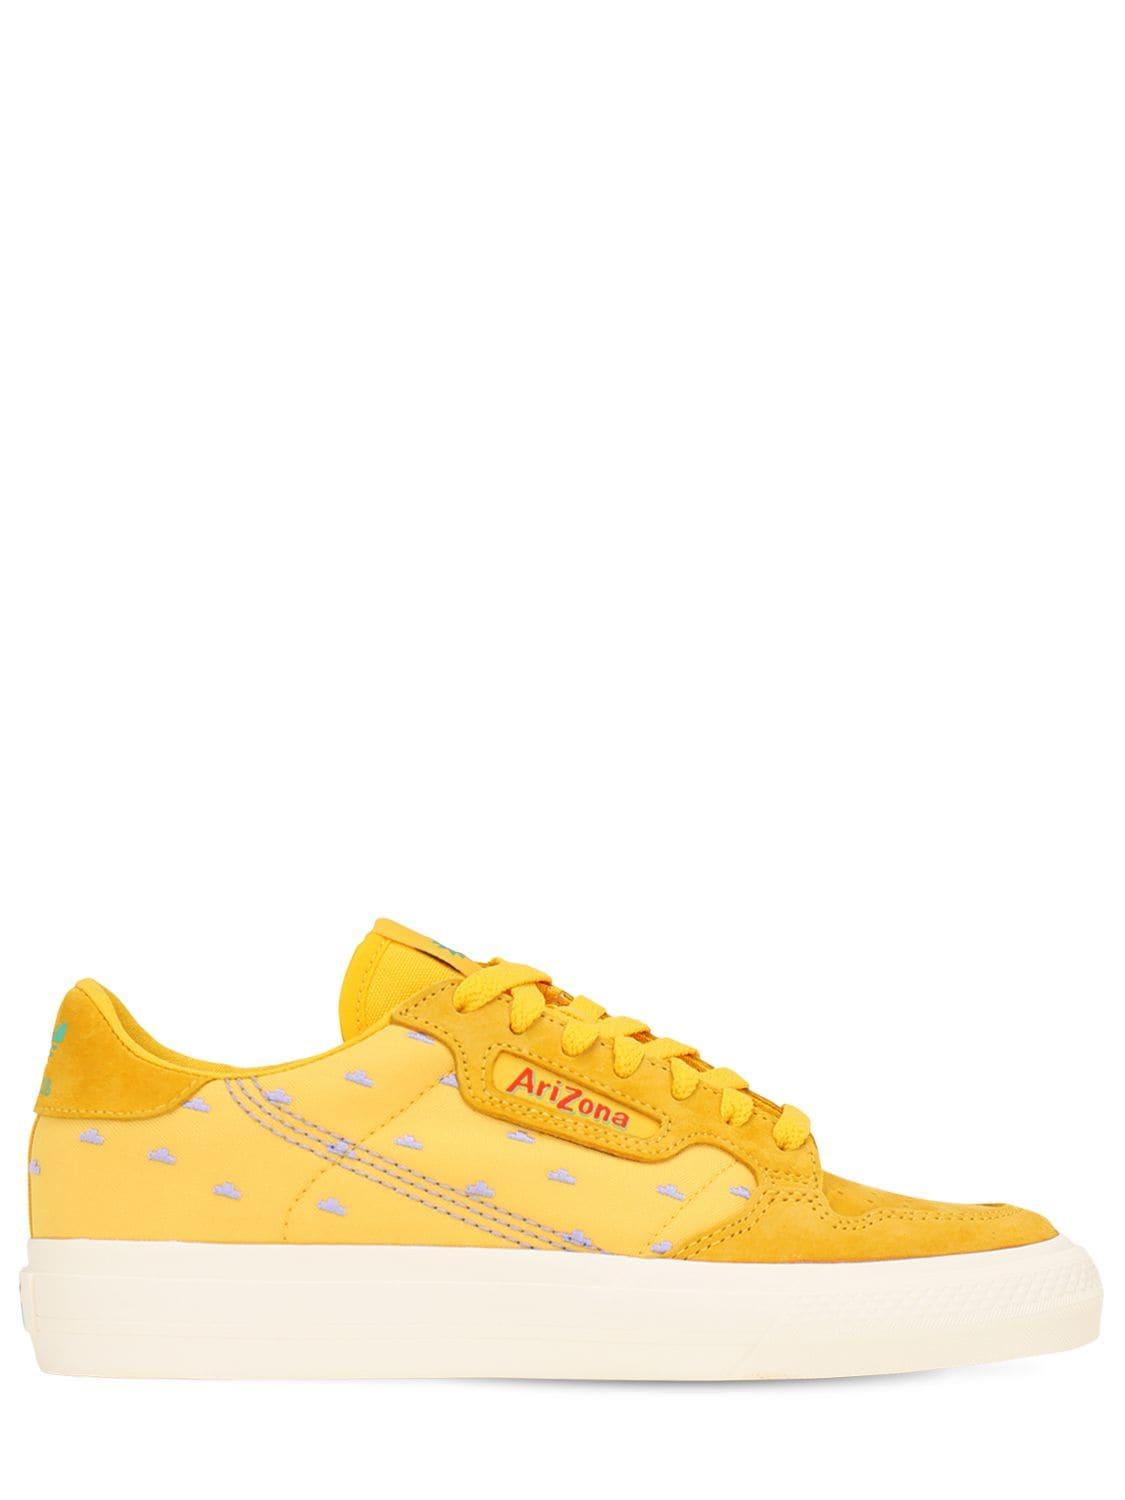 adidas Originals Continental 80 Vulc Trainers in Yellow | Lyst UK